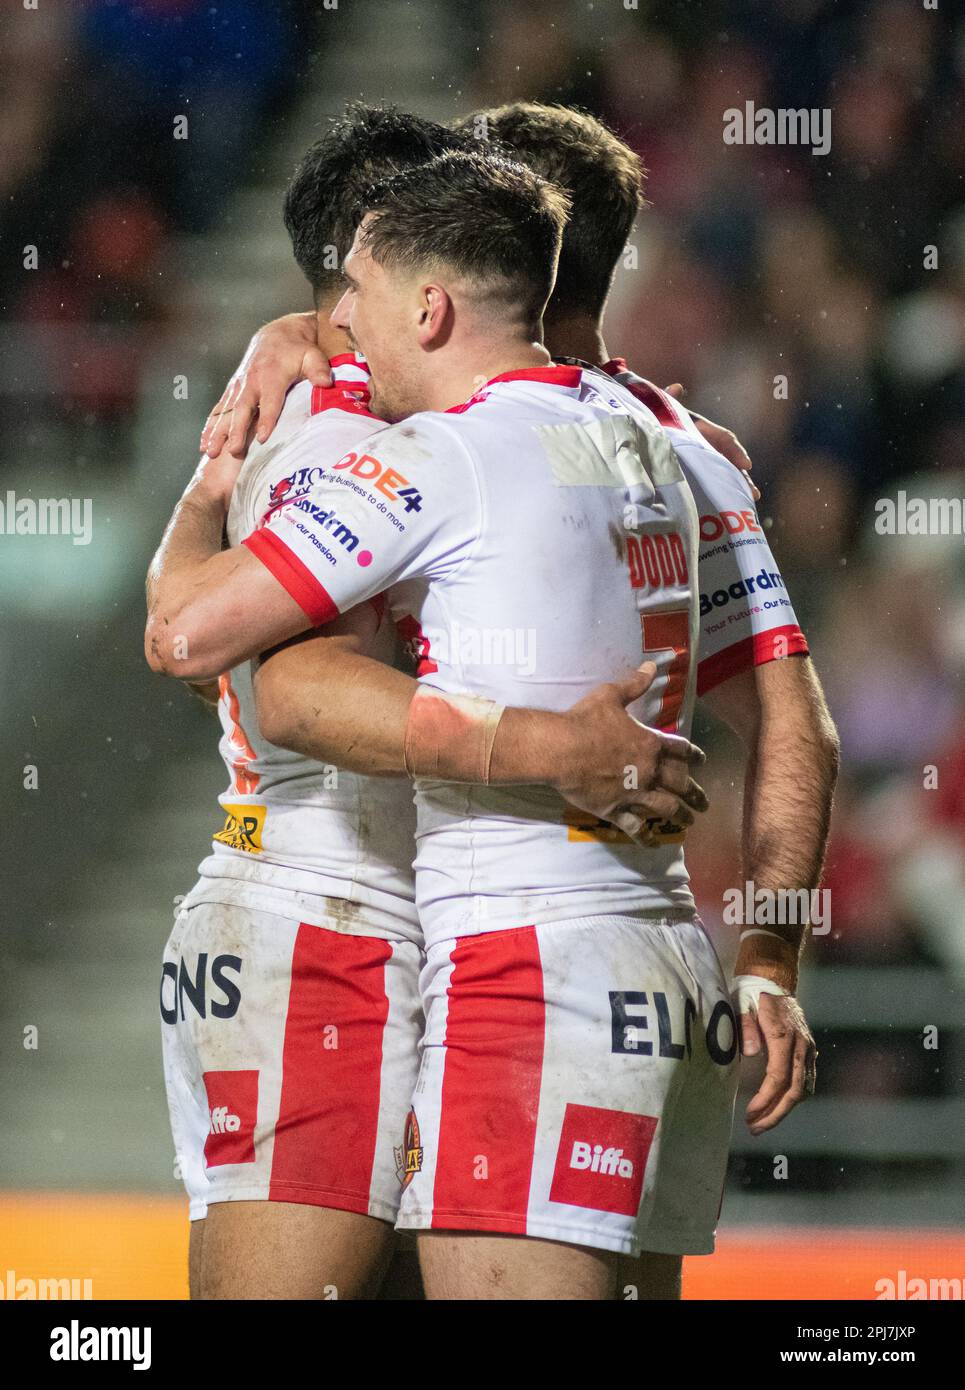 St Helens, Merseyside, England 31st March 2023. St Helens celebrates Lewis Dodd's try during, St Helens Rugby Football Club V Wakefield Trinity Rugby League Football Club at the Totally Wicked Stadium, the Betfred Super League (Credit Image: ©Cody Froggatt/Alamy live news) Stock Photo